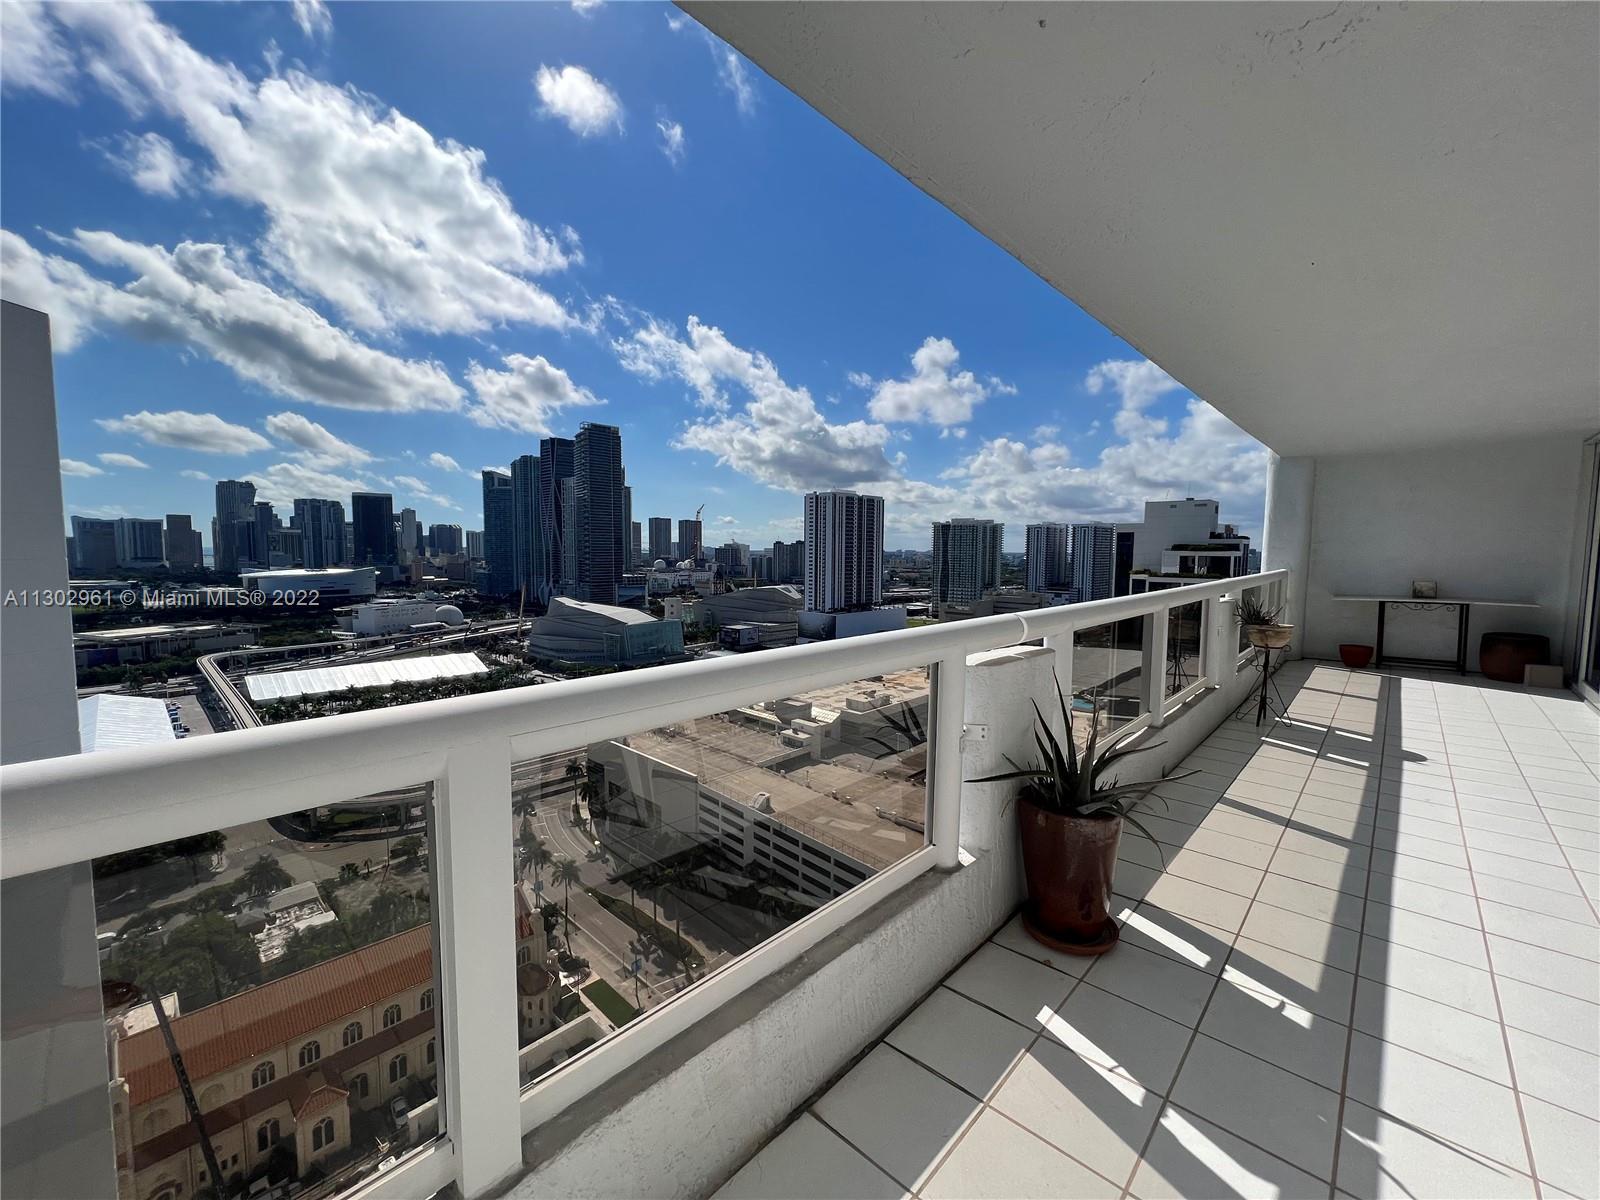 Massive 3 bed 3 bath Condo centrally located in Edgewater with a breath-taking view of both the city